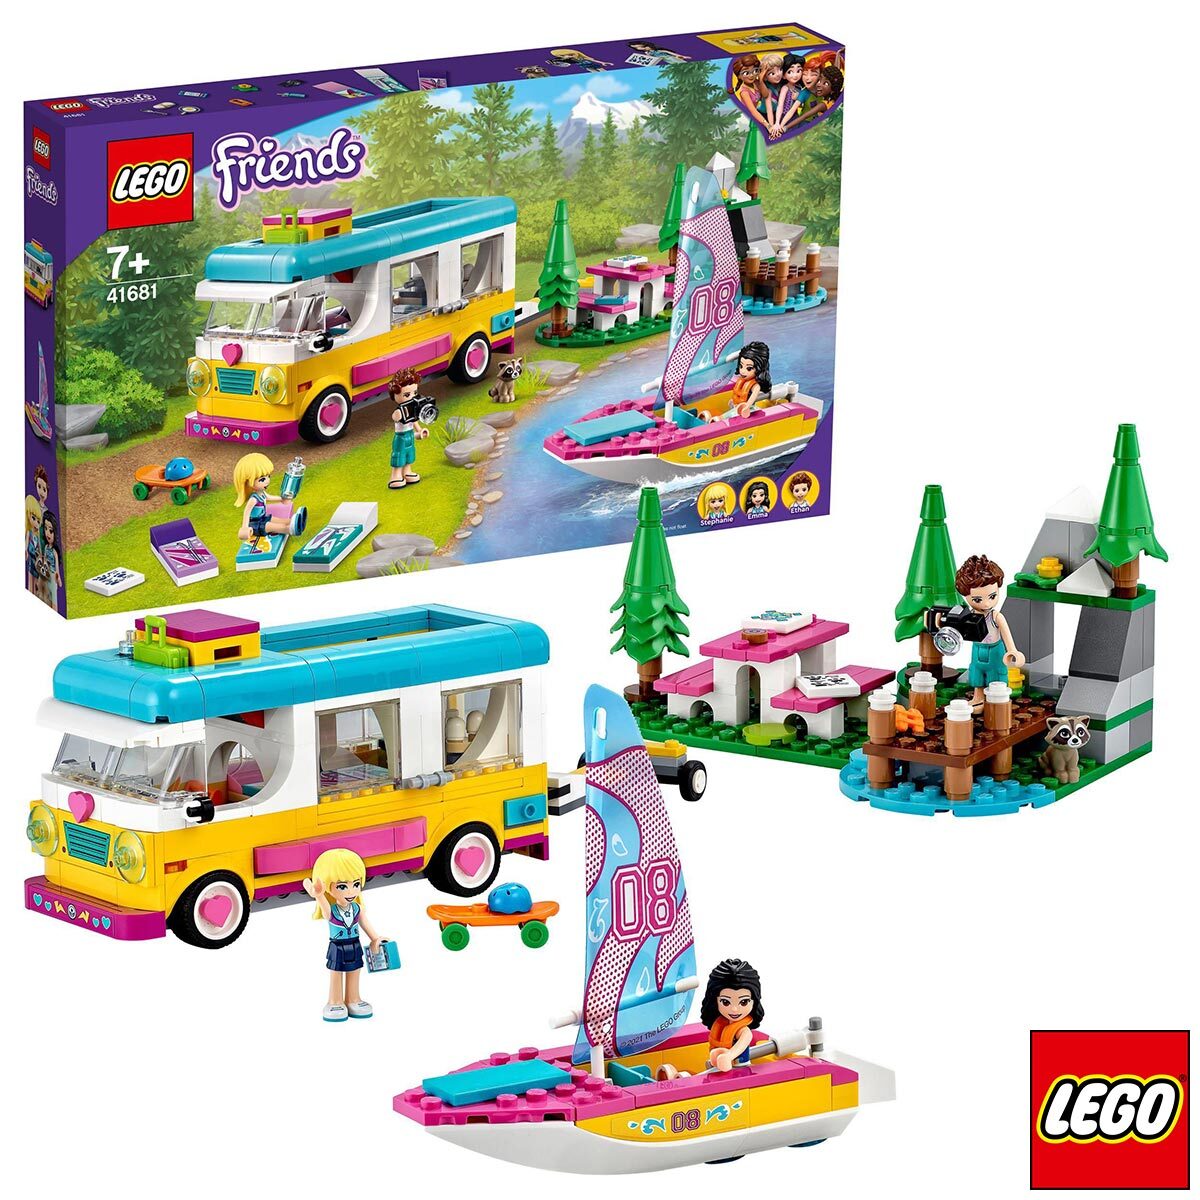 Buy LEGO Friends Forest Camper Van & Sailboat Box & Product Image at costco.co.uk